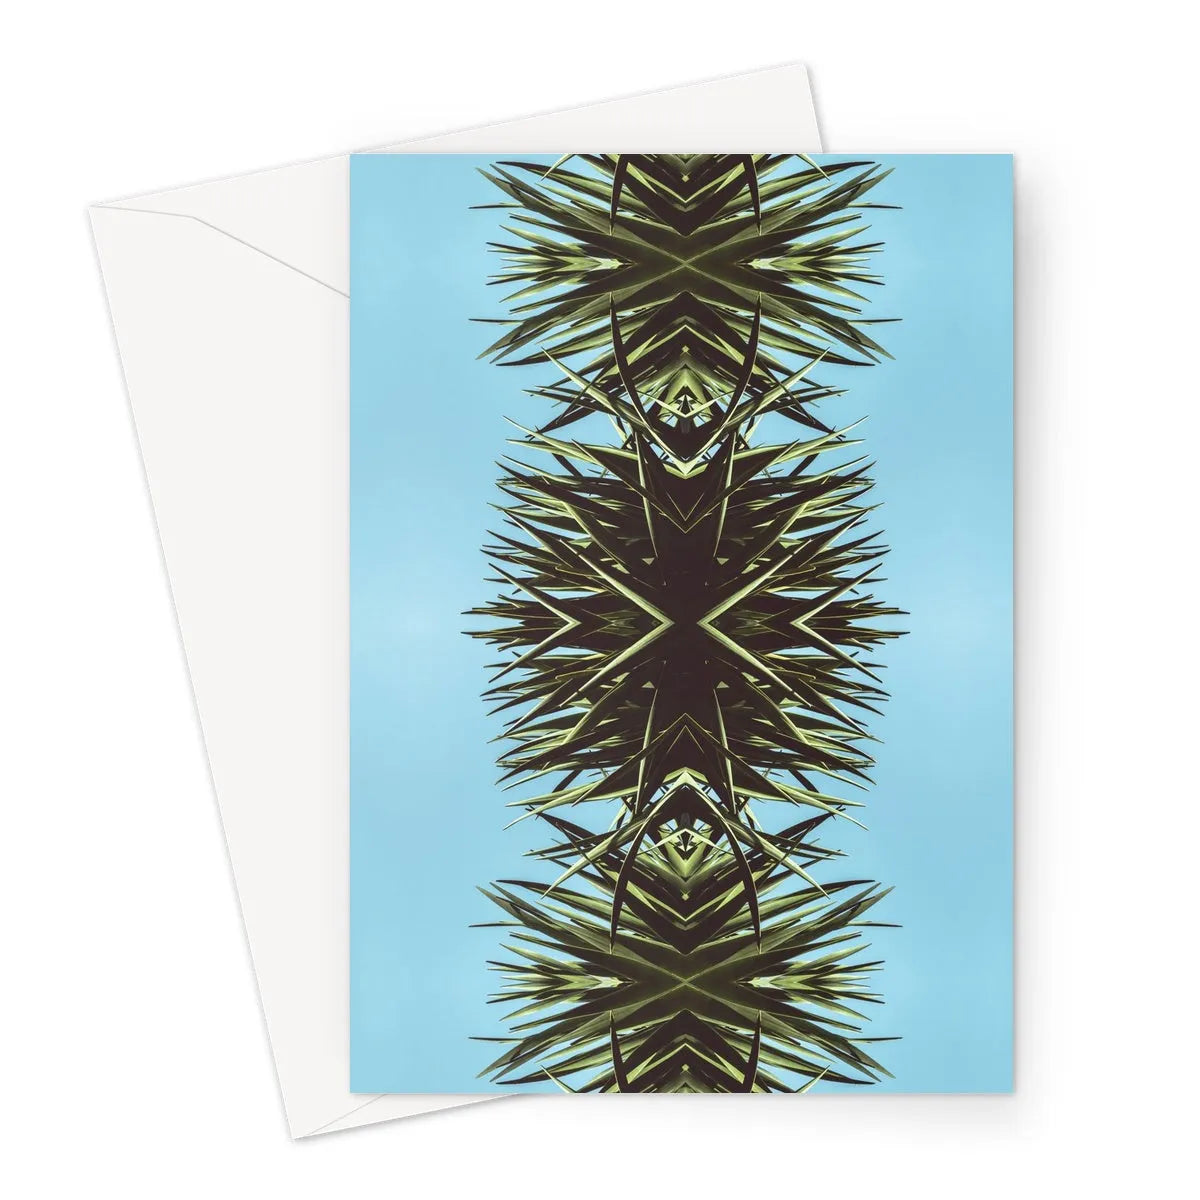 Pointy Greeting Card - A5 Portrait / 1 Card - Greeting & Note Cards - Aesthetic Art